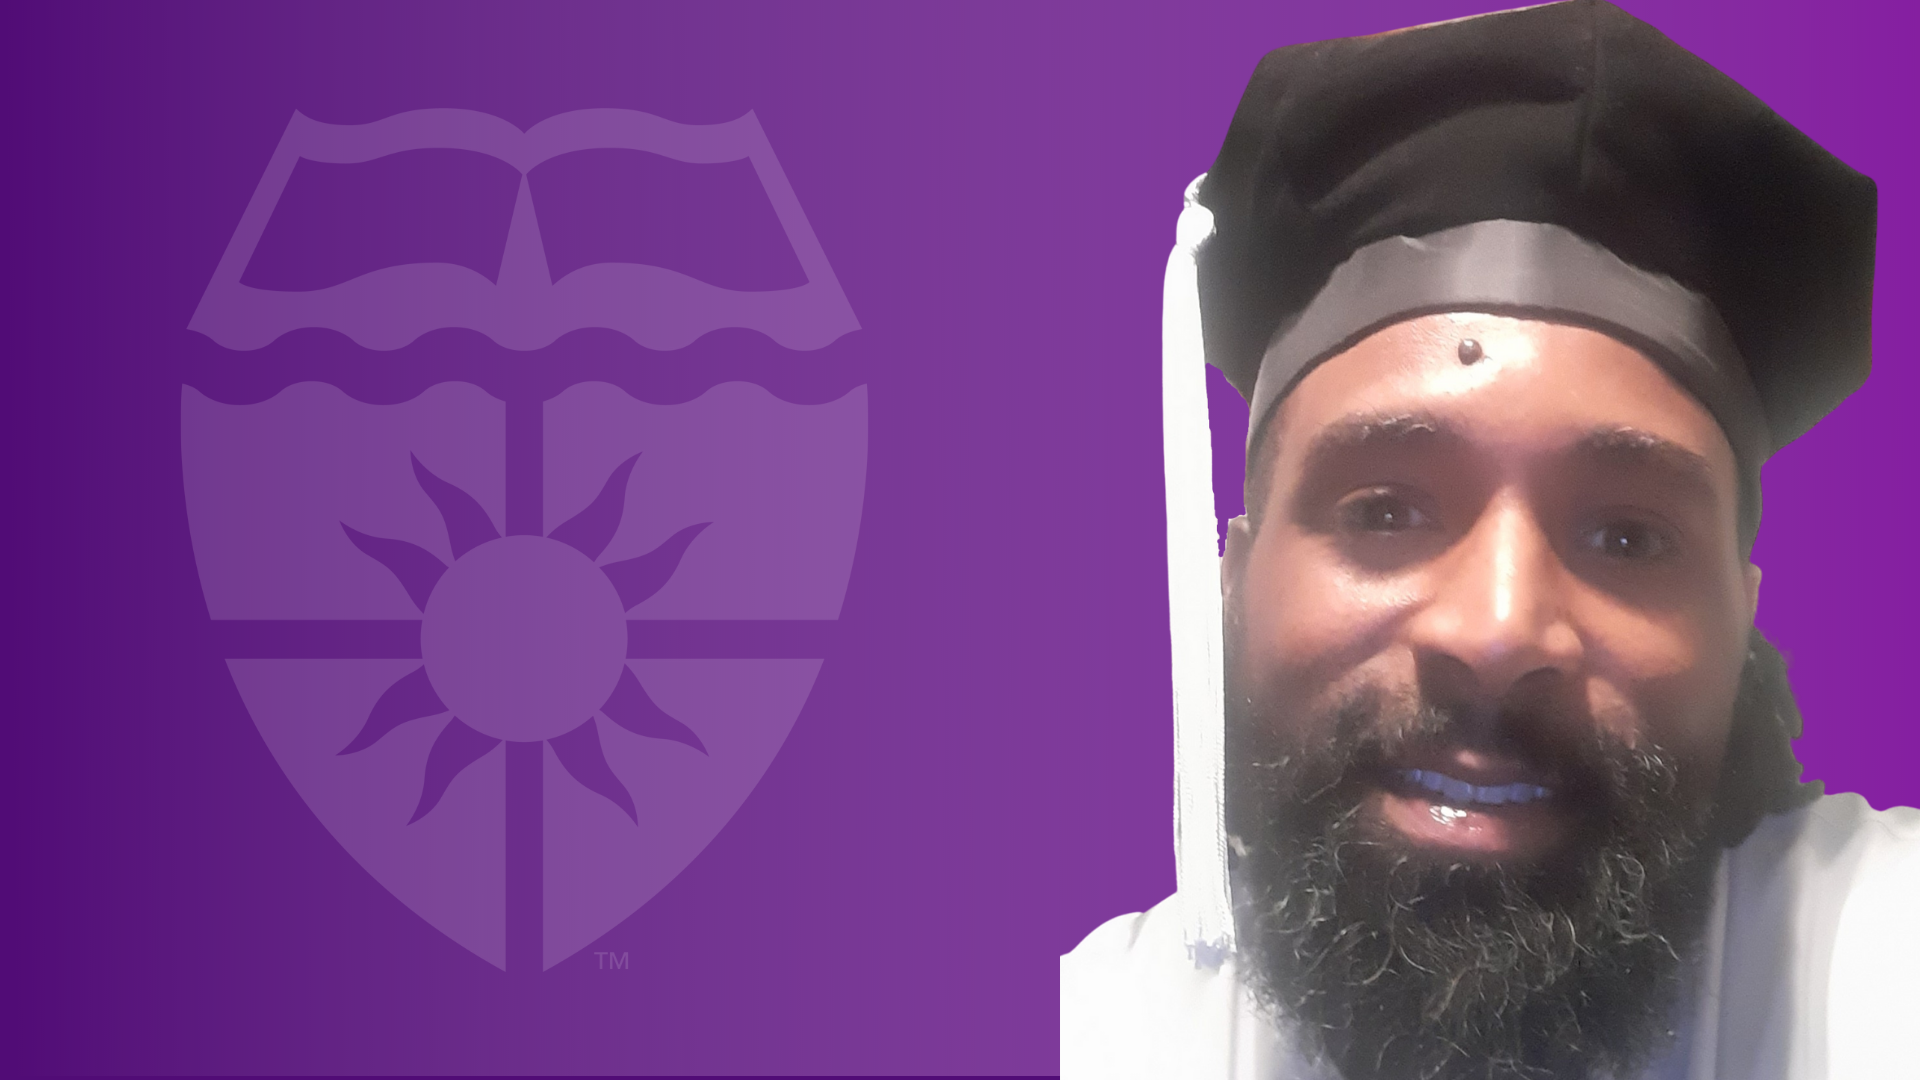 Kasim Abdur Razzaq in front of a purple background with the St. Thomas shield